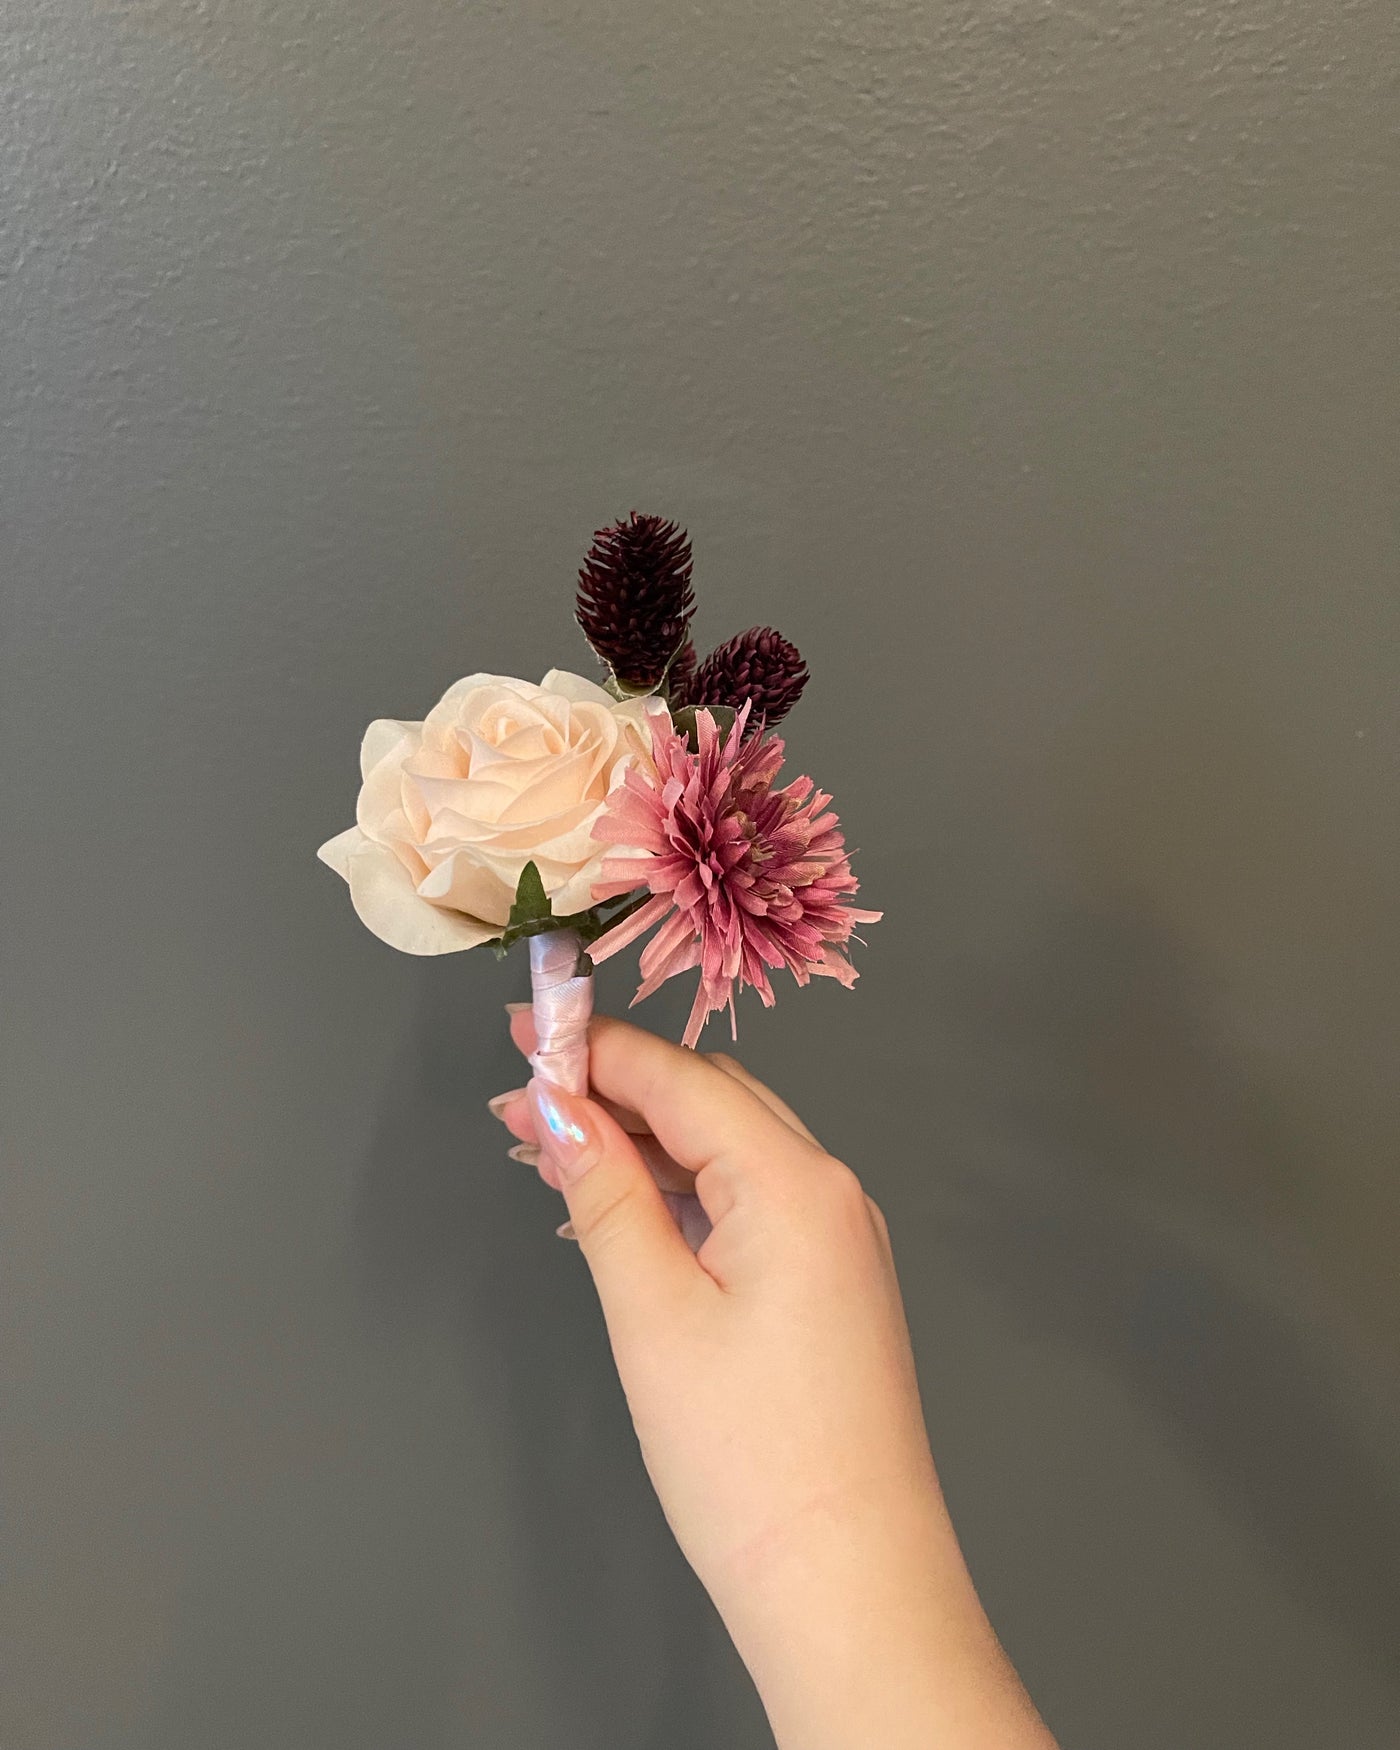 This 6" boutonniere features a pale pink rose, a spider mom, burgundy thistle, and finished with a satin pink ribbon.